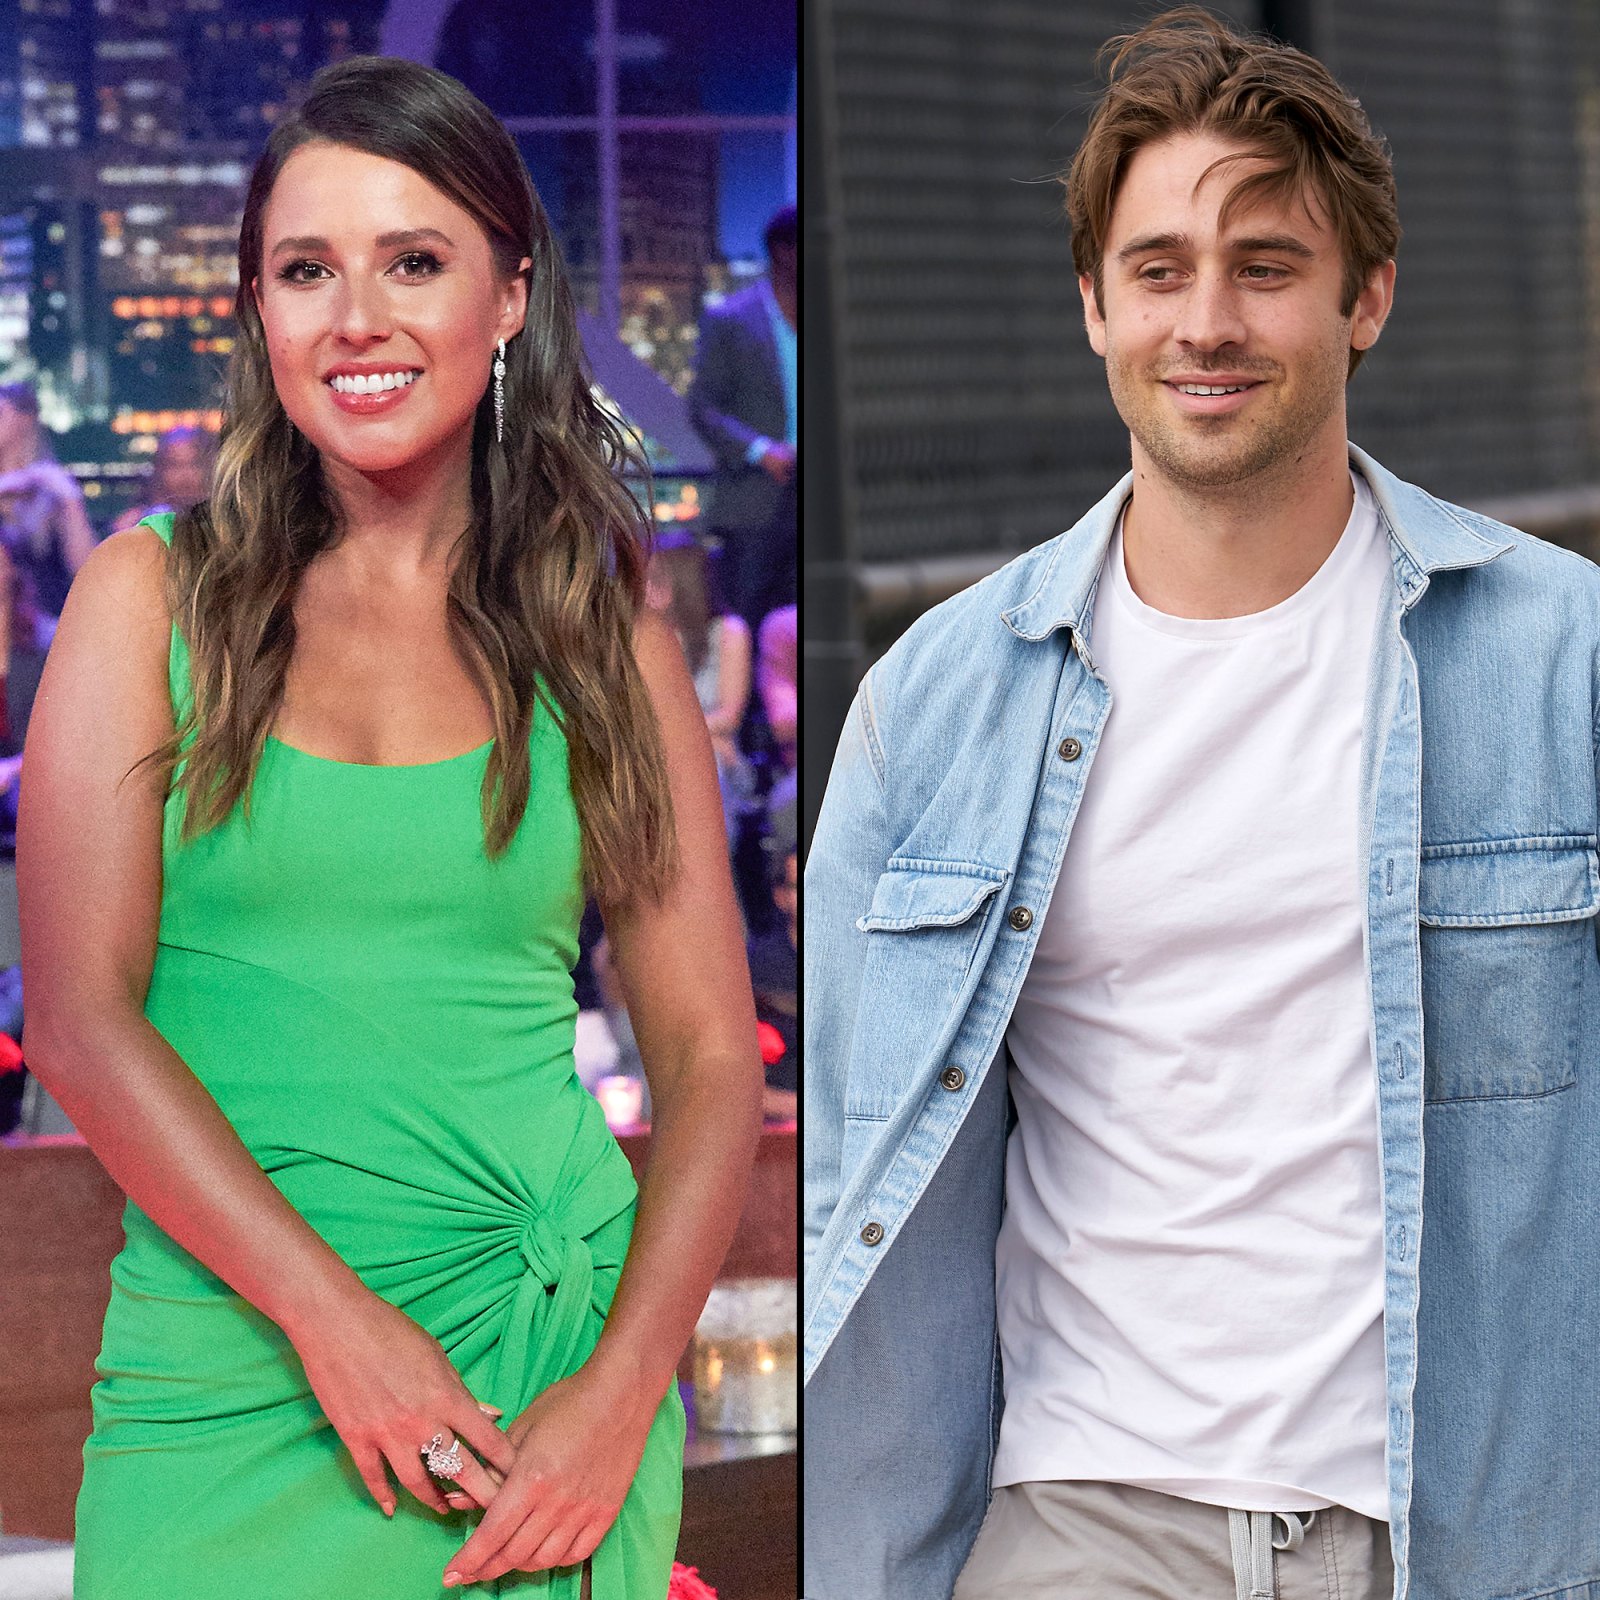 Katie Thurston Suggests Greg Grippo Gastlighted Her as Bachelor Nation Weighs In